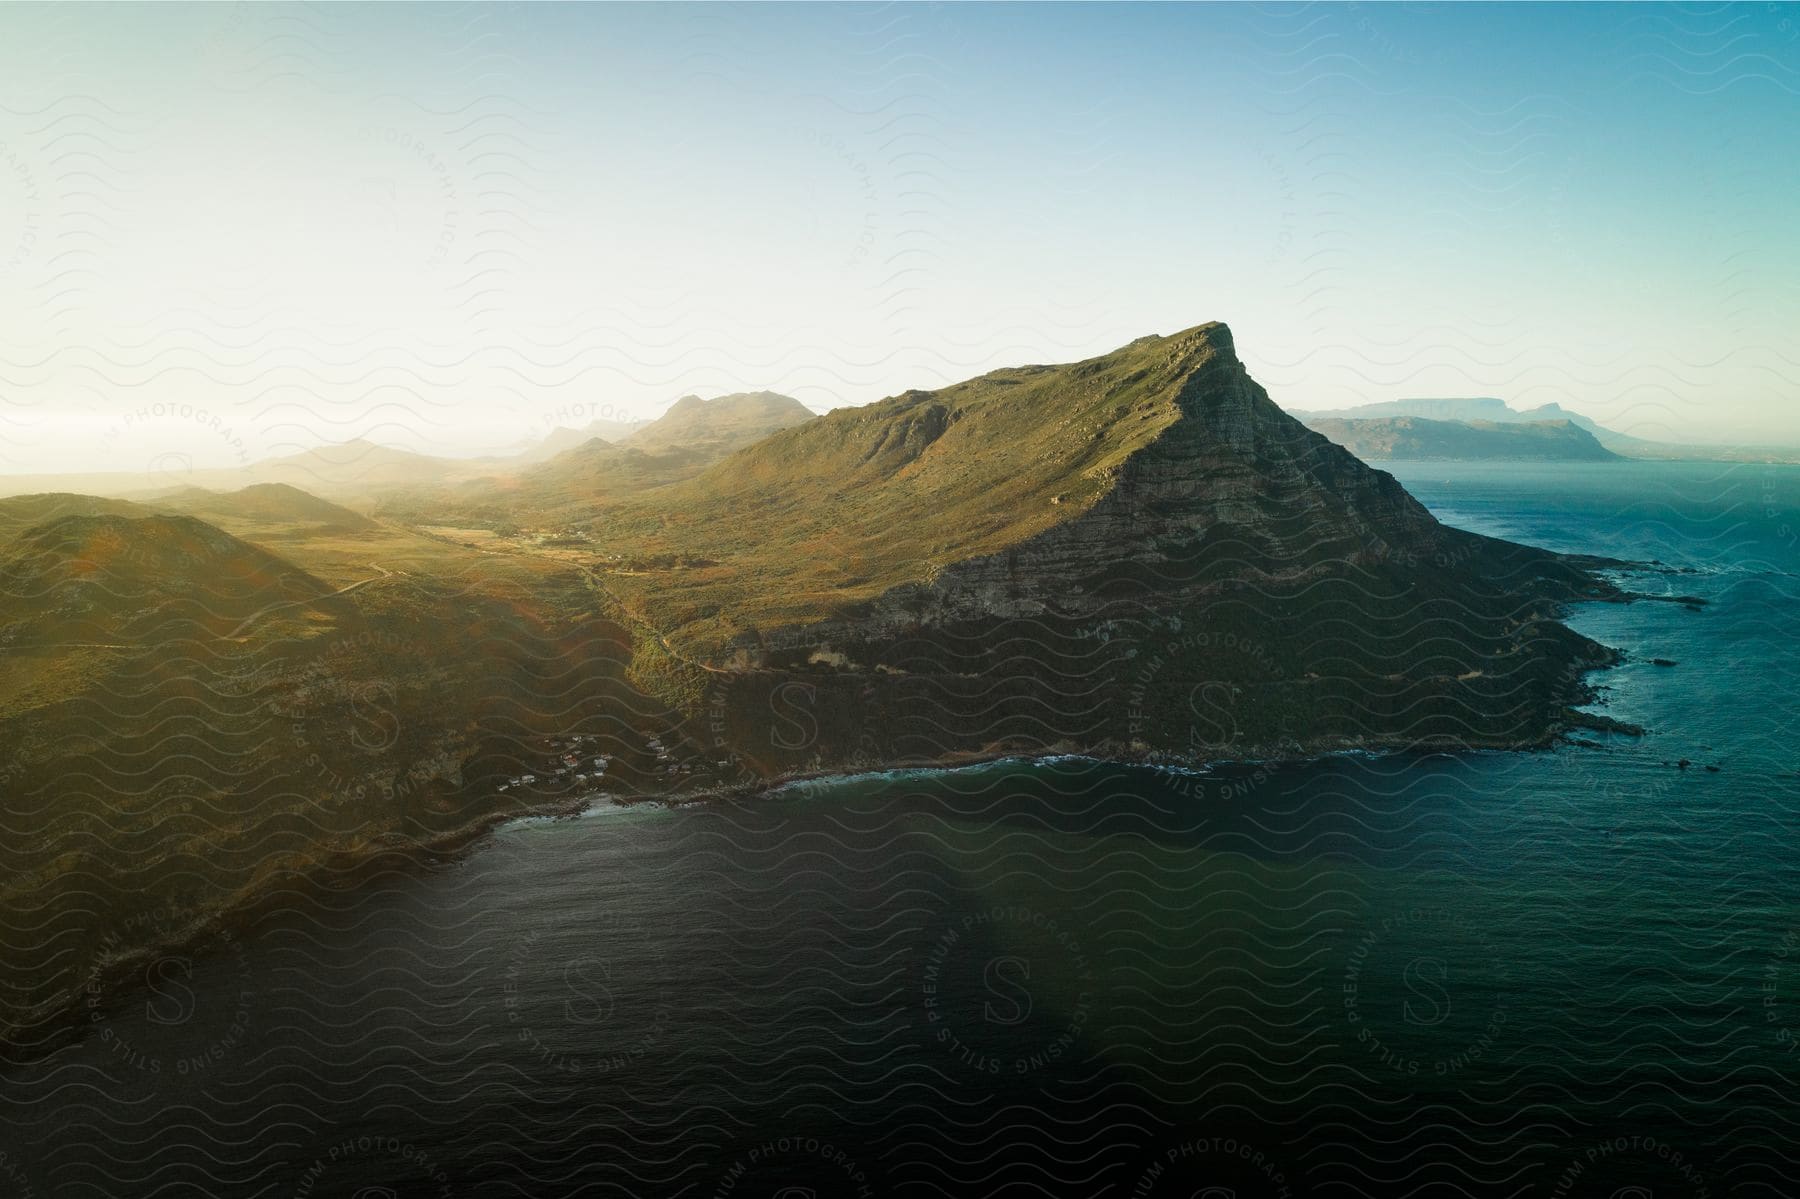 A breathtaking view of a mountainous coast bathed in golden sunset light.